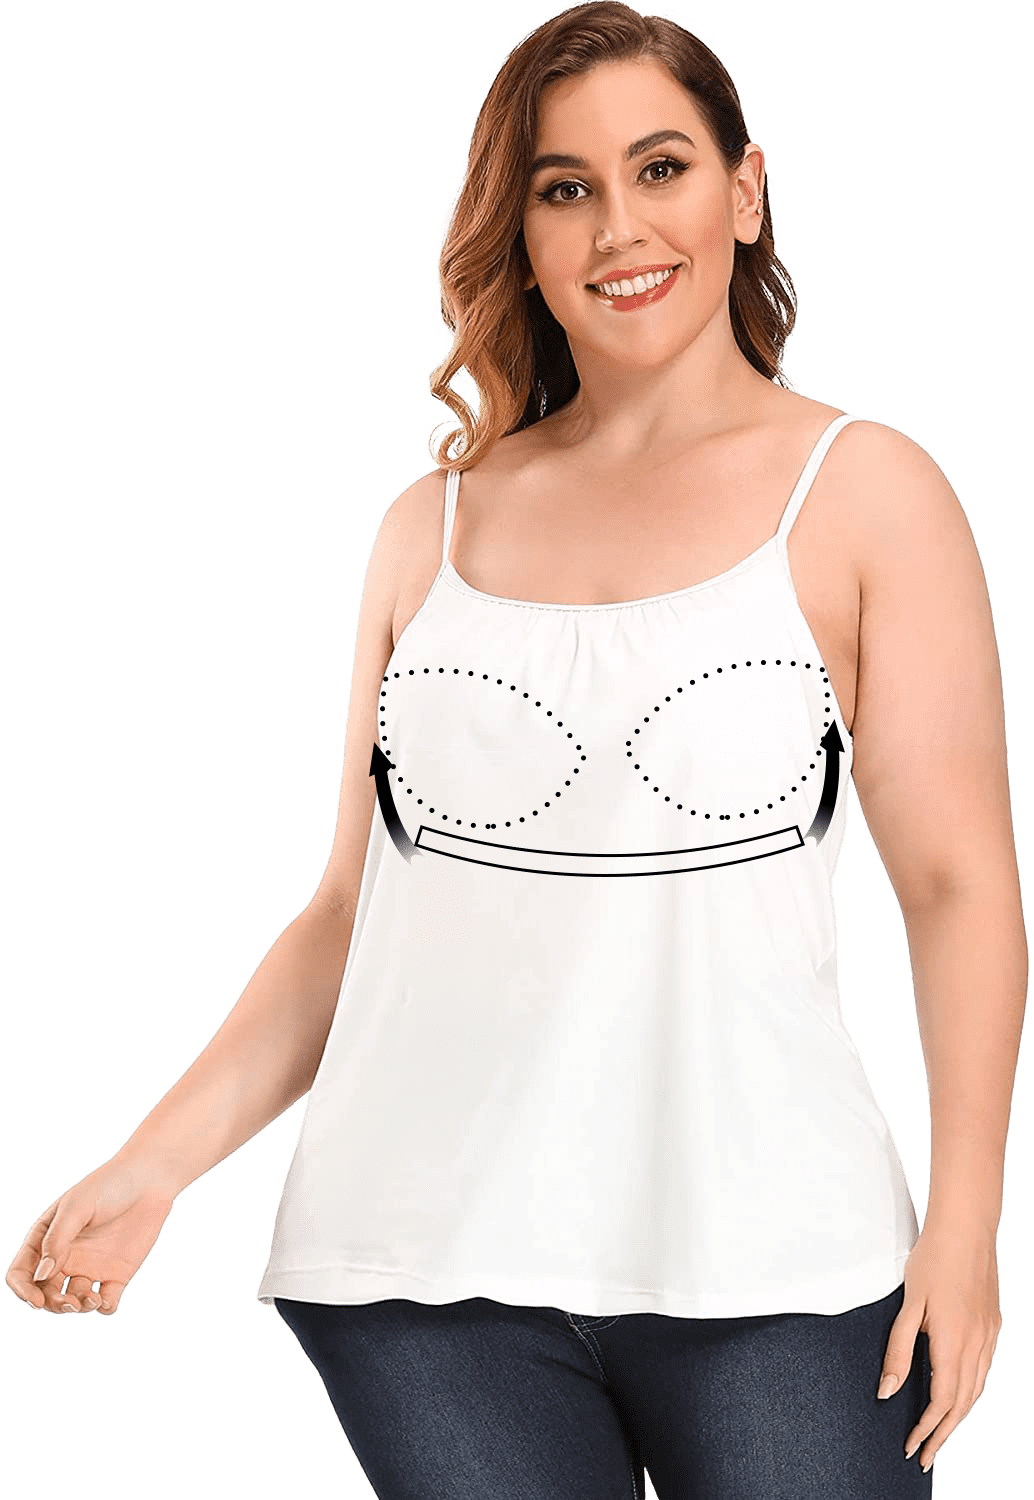 FITVALEN Women's Camisole with Built in Bra Plus Size Casual Loose Tank  Tops Sleeveless Shirts Adjustable Straps (S-4XL） 